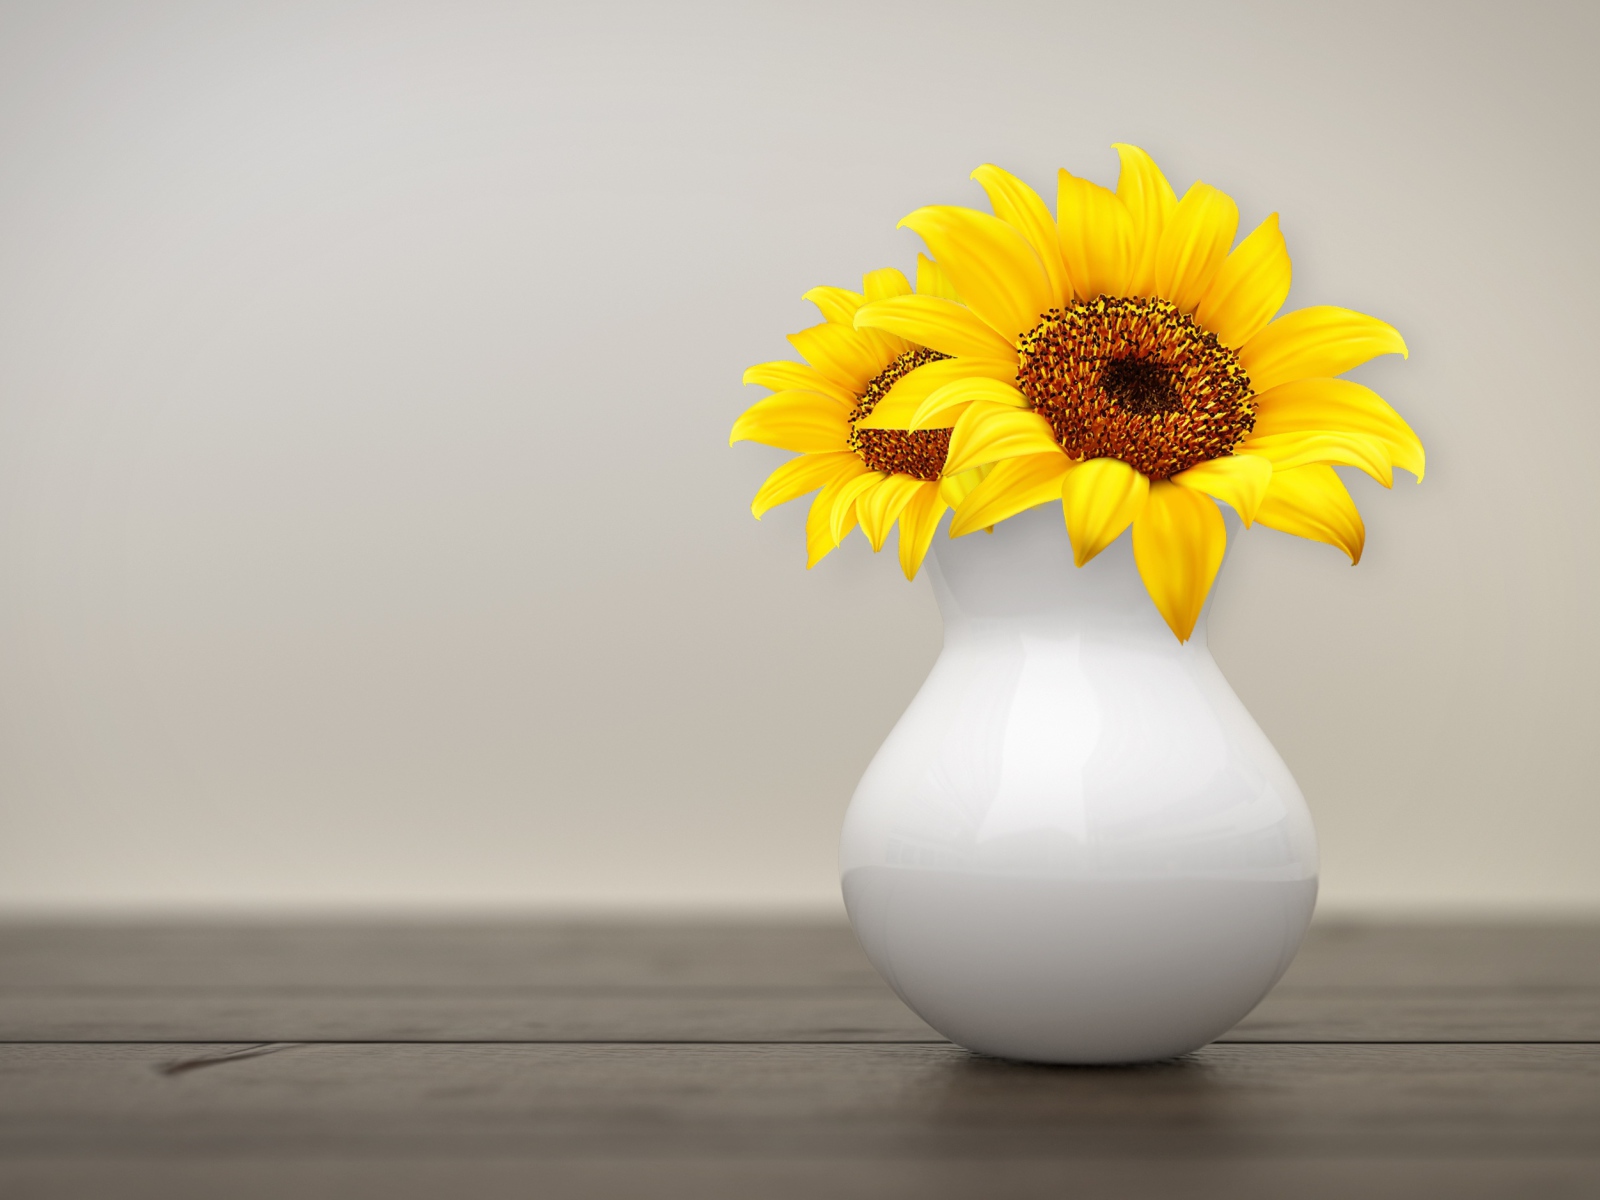 Two sunflower flowers in a white vase on a wall background